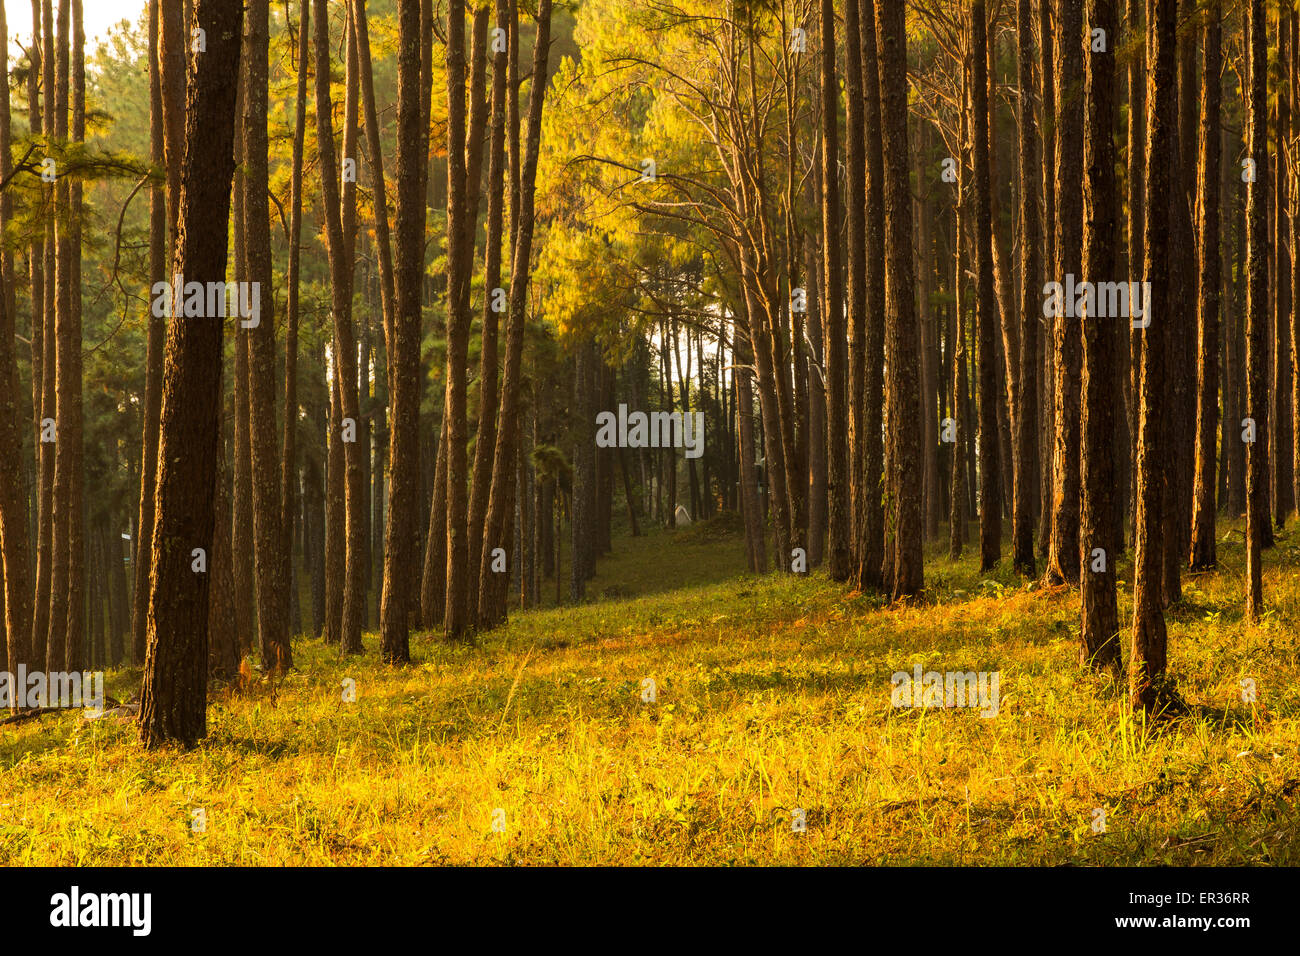 sunray shinning thought fog of pines forest Stock Photo